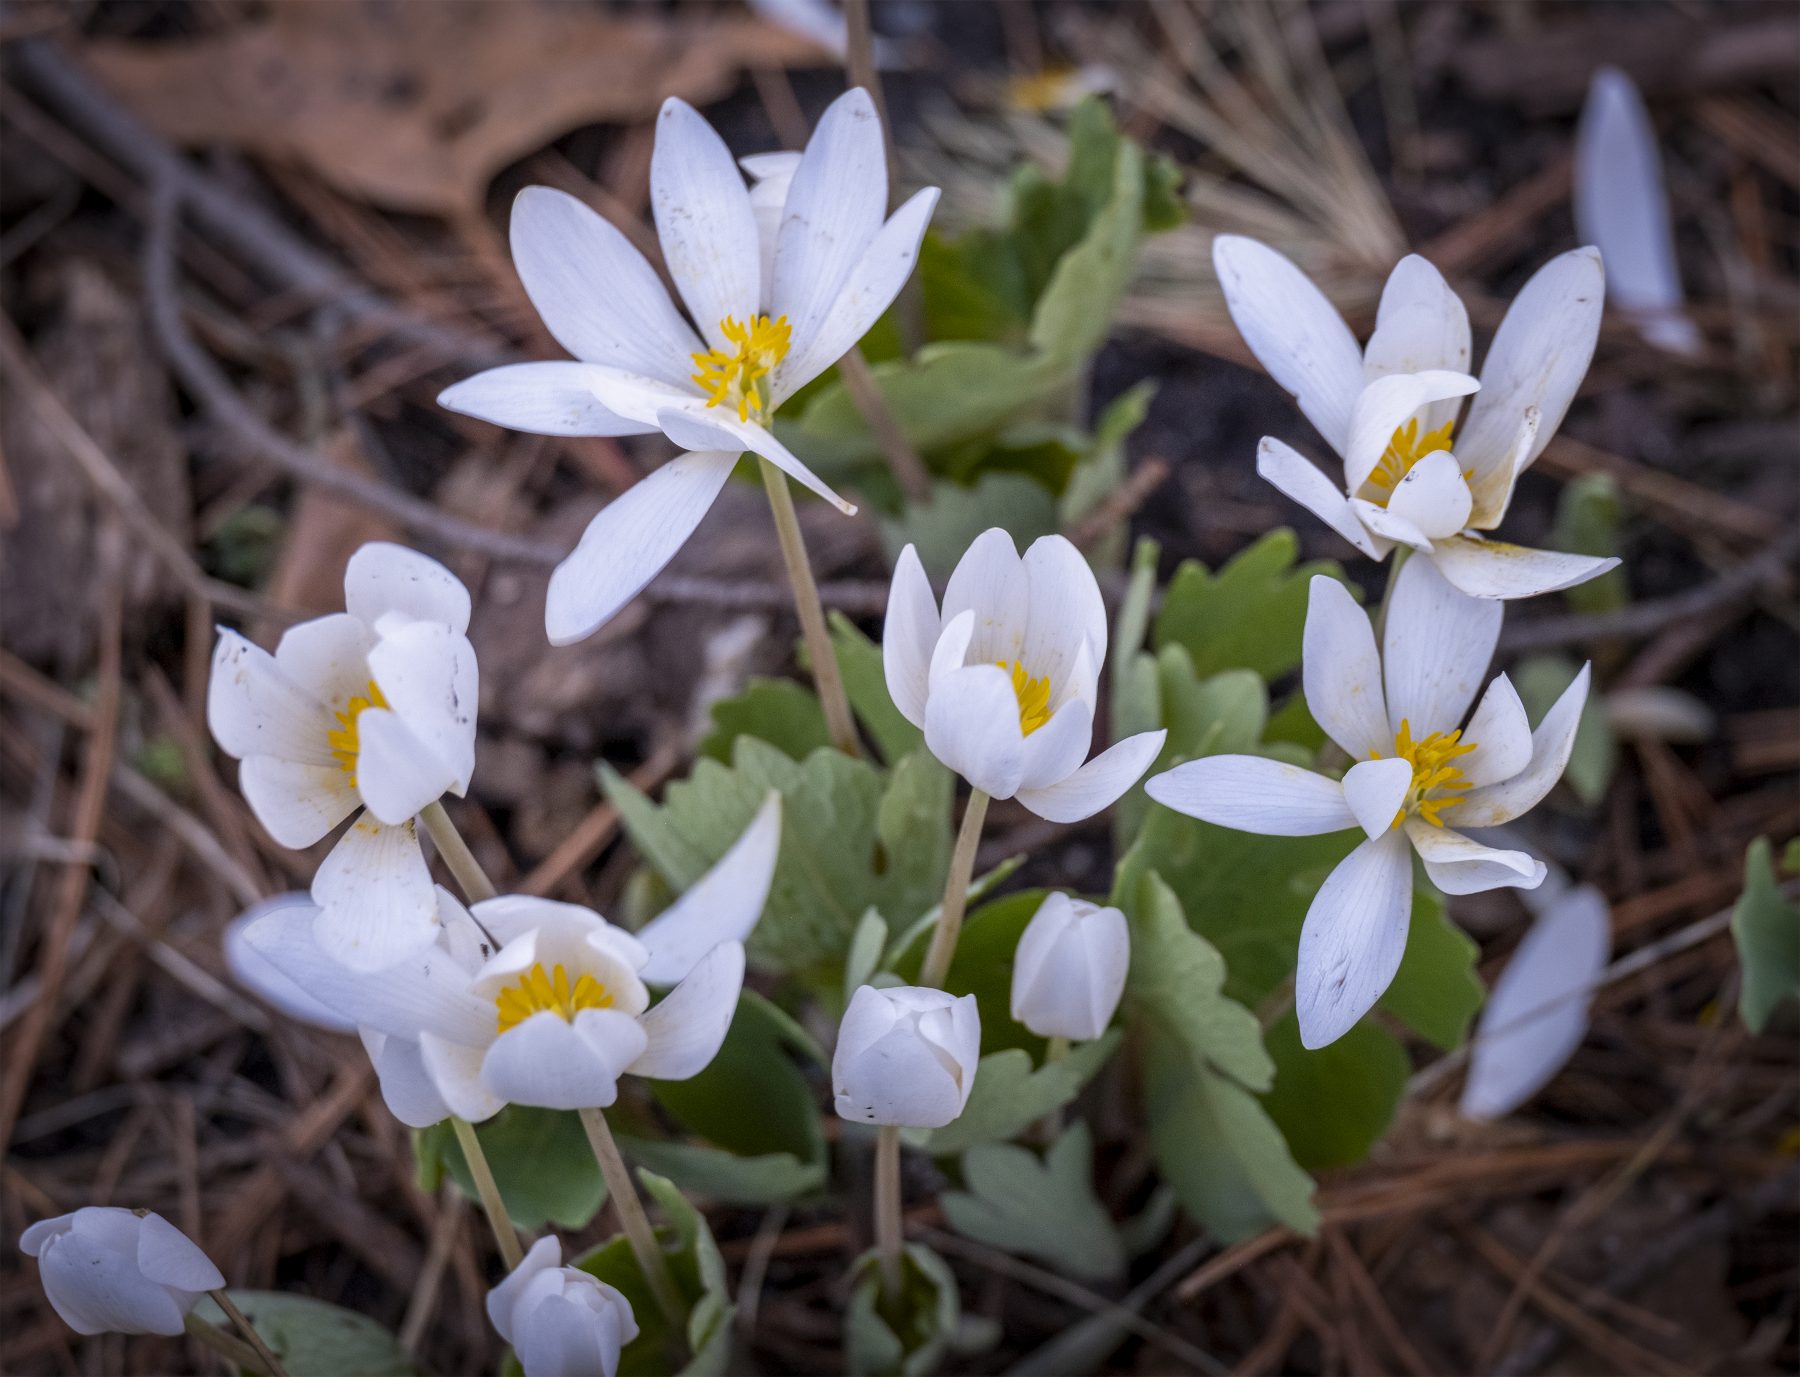 A Minnesota Wildflower, the Sanguinaria canadensis (or Bloodroot) blooms for only a day or two before dying